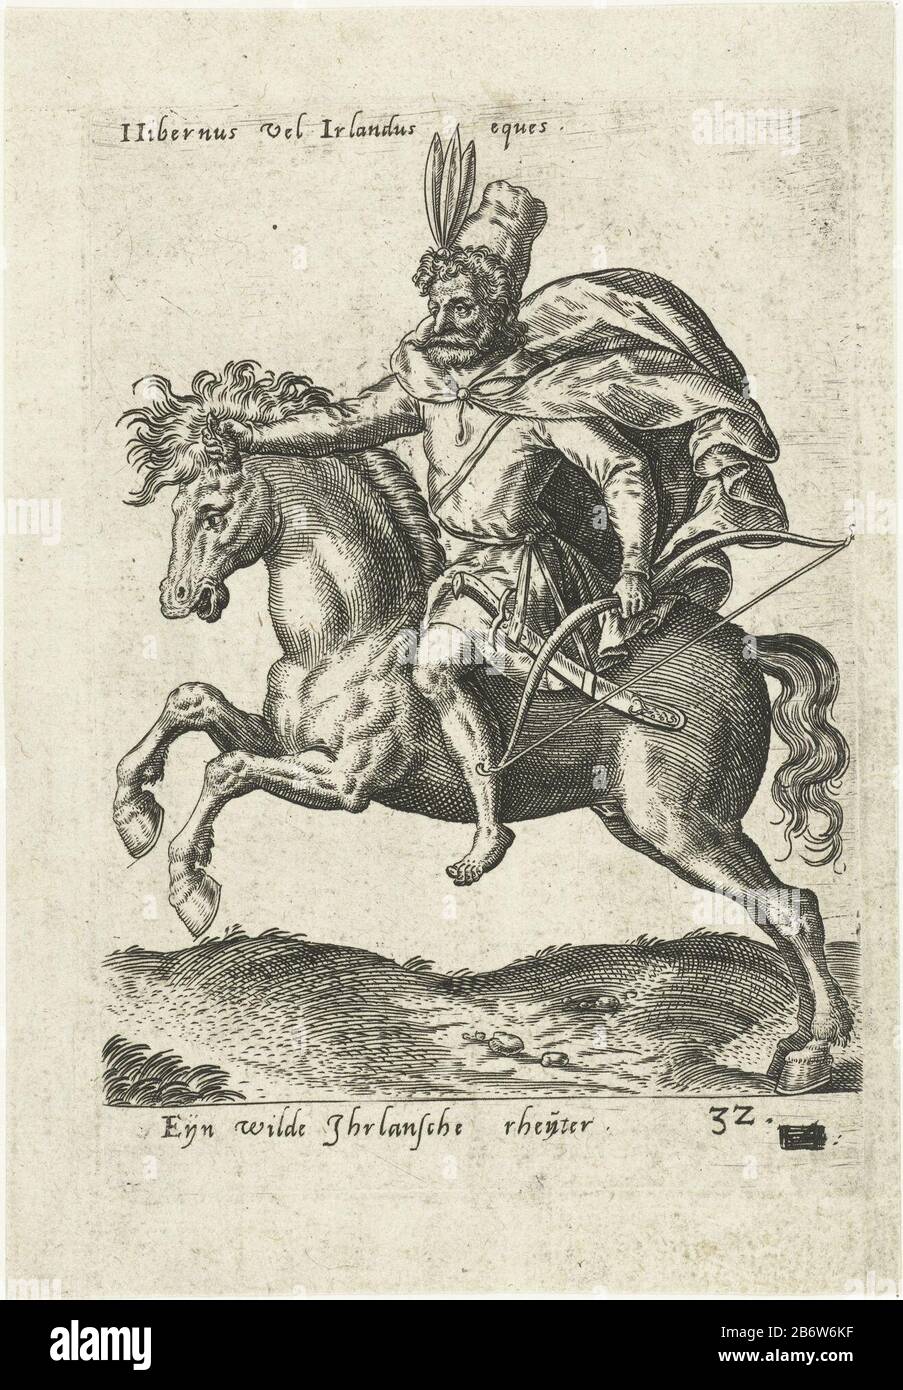 Ierse ruiter Horse and rider to the left. The horse is galloping. The rider is Irish and riding the horse without saddle or reins. He is holding a bow. The picture has a caption German and a Latin inscription. Post originally from 'Equitum Descripció ... '1577. Manufacturer : printmaker Abraham de Bruyn (attributed to) Publisher: Caspar Rutz (possible) Place manufacture: Cologne Date: 1577 Physical features: car material: paper Technique: engra (printing process) Dimensions: plate edge: h 140 mm × b 98 mmToelichtingPrent originally published in 'Equitum Descripció, quomodo Equestres copie, nos Stock Photo